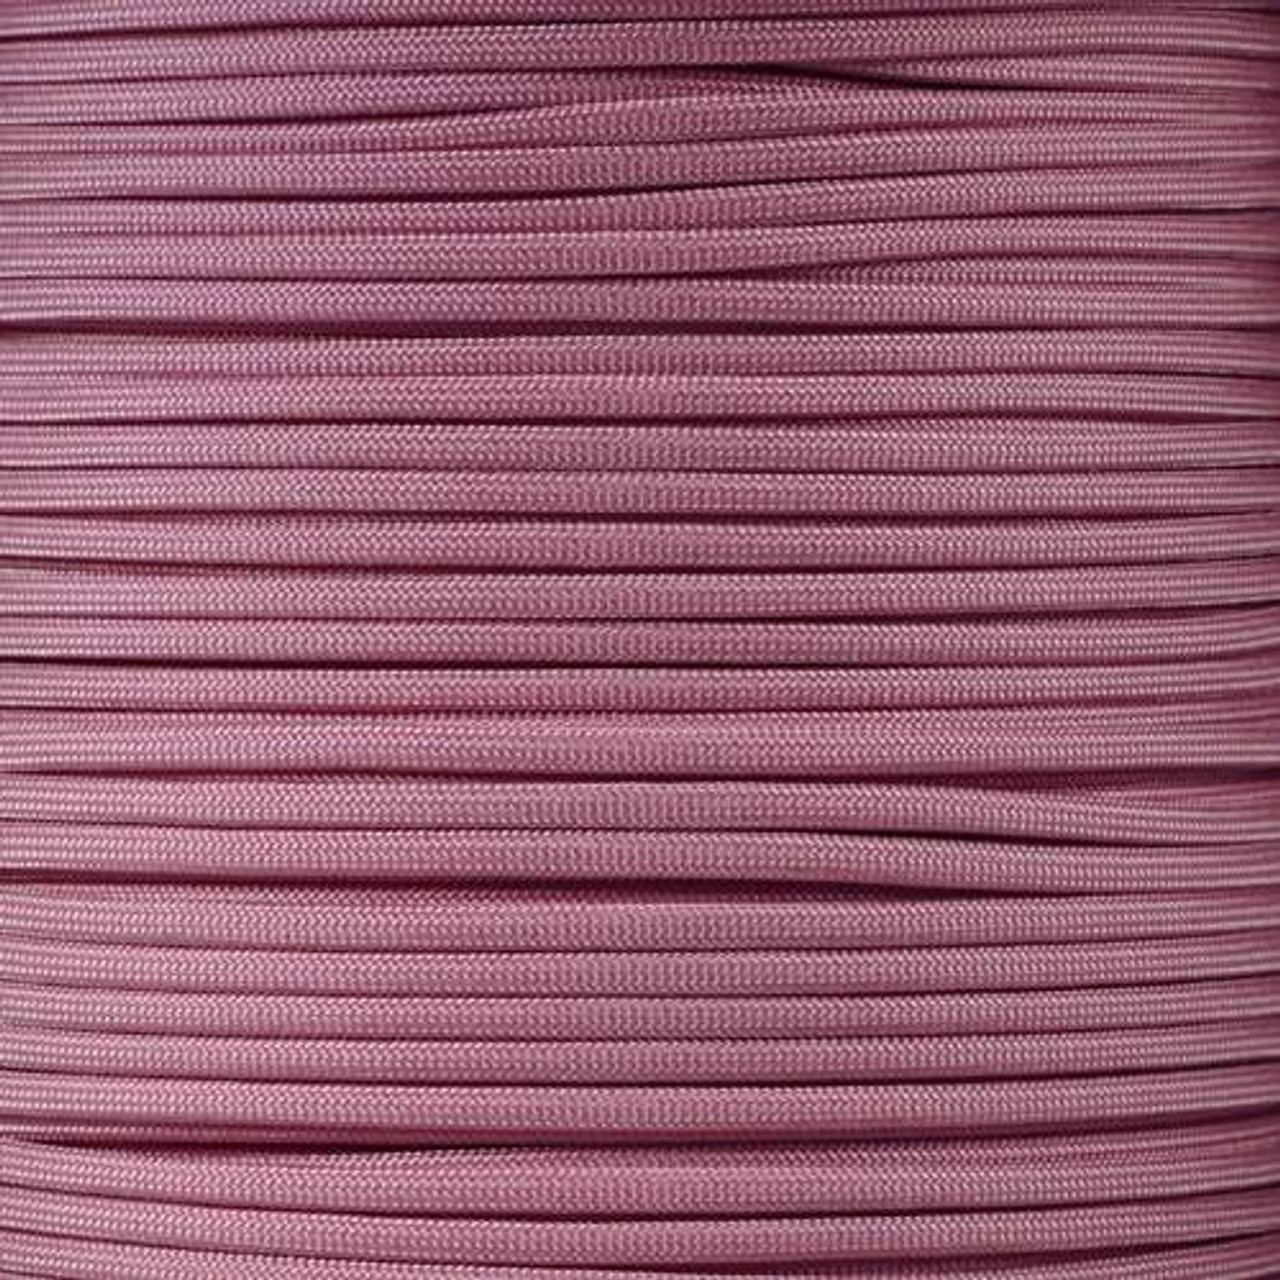 Reflective Paracord Type III 550 (PES) #6036 pastel pink